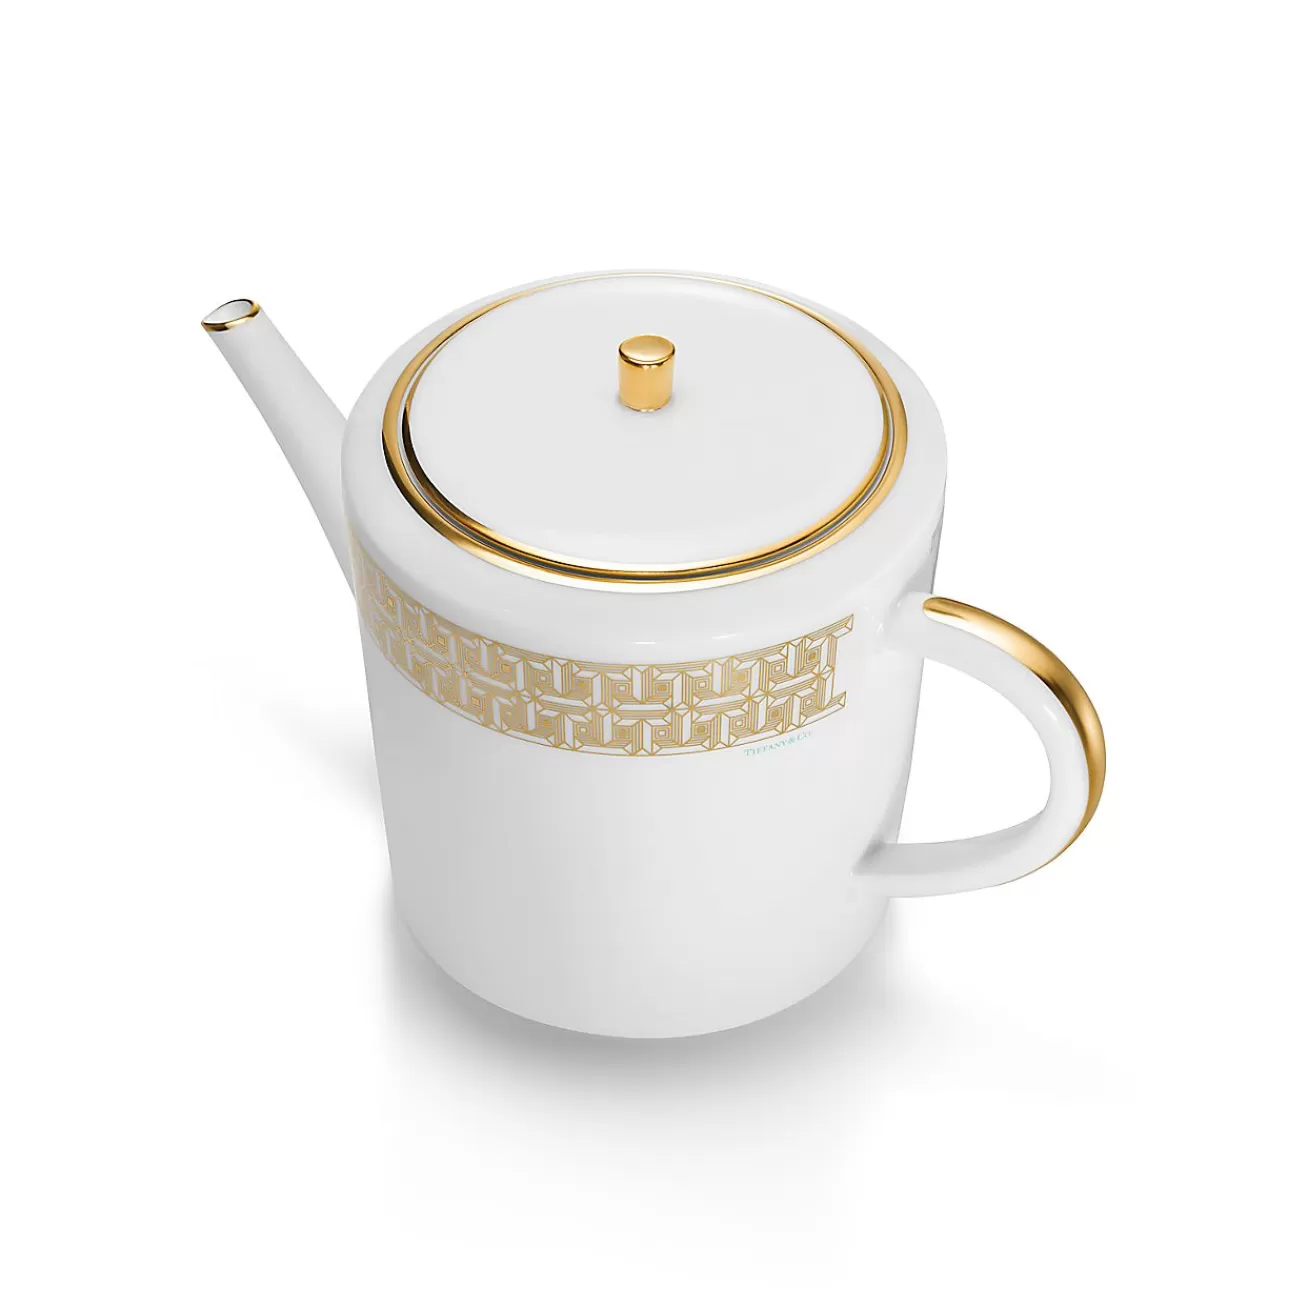 Tiffany & Co. Gold Tiffany T True Teapot with a Hand-painted Gold Rim | ^ Tableware | Coffee & Tea